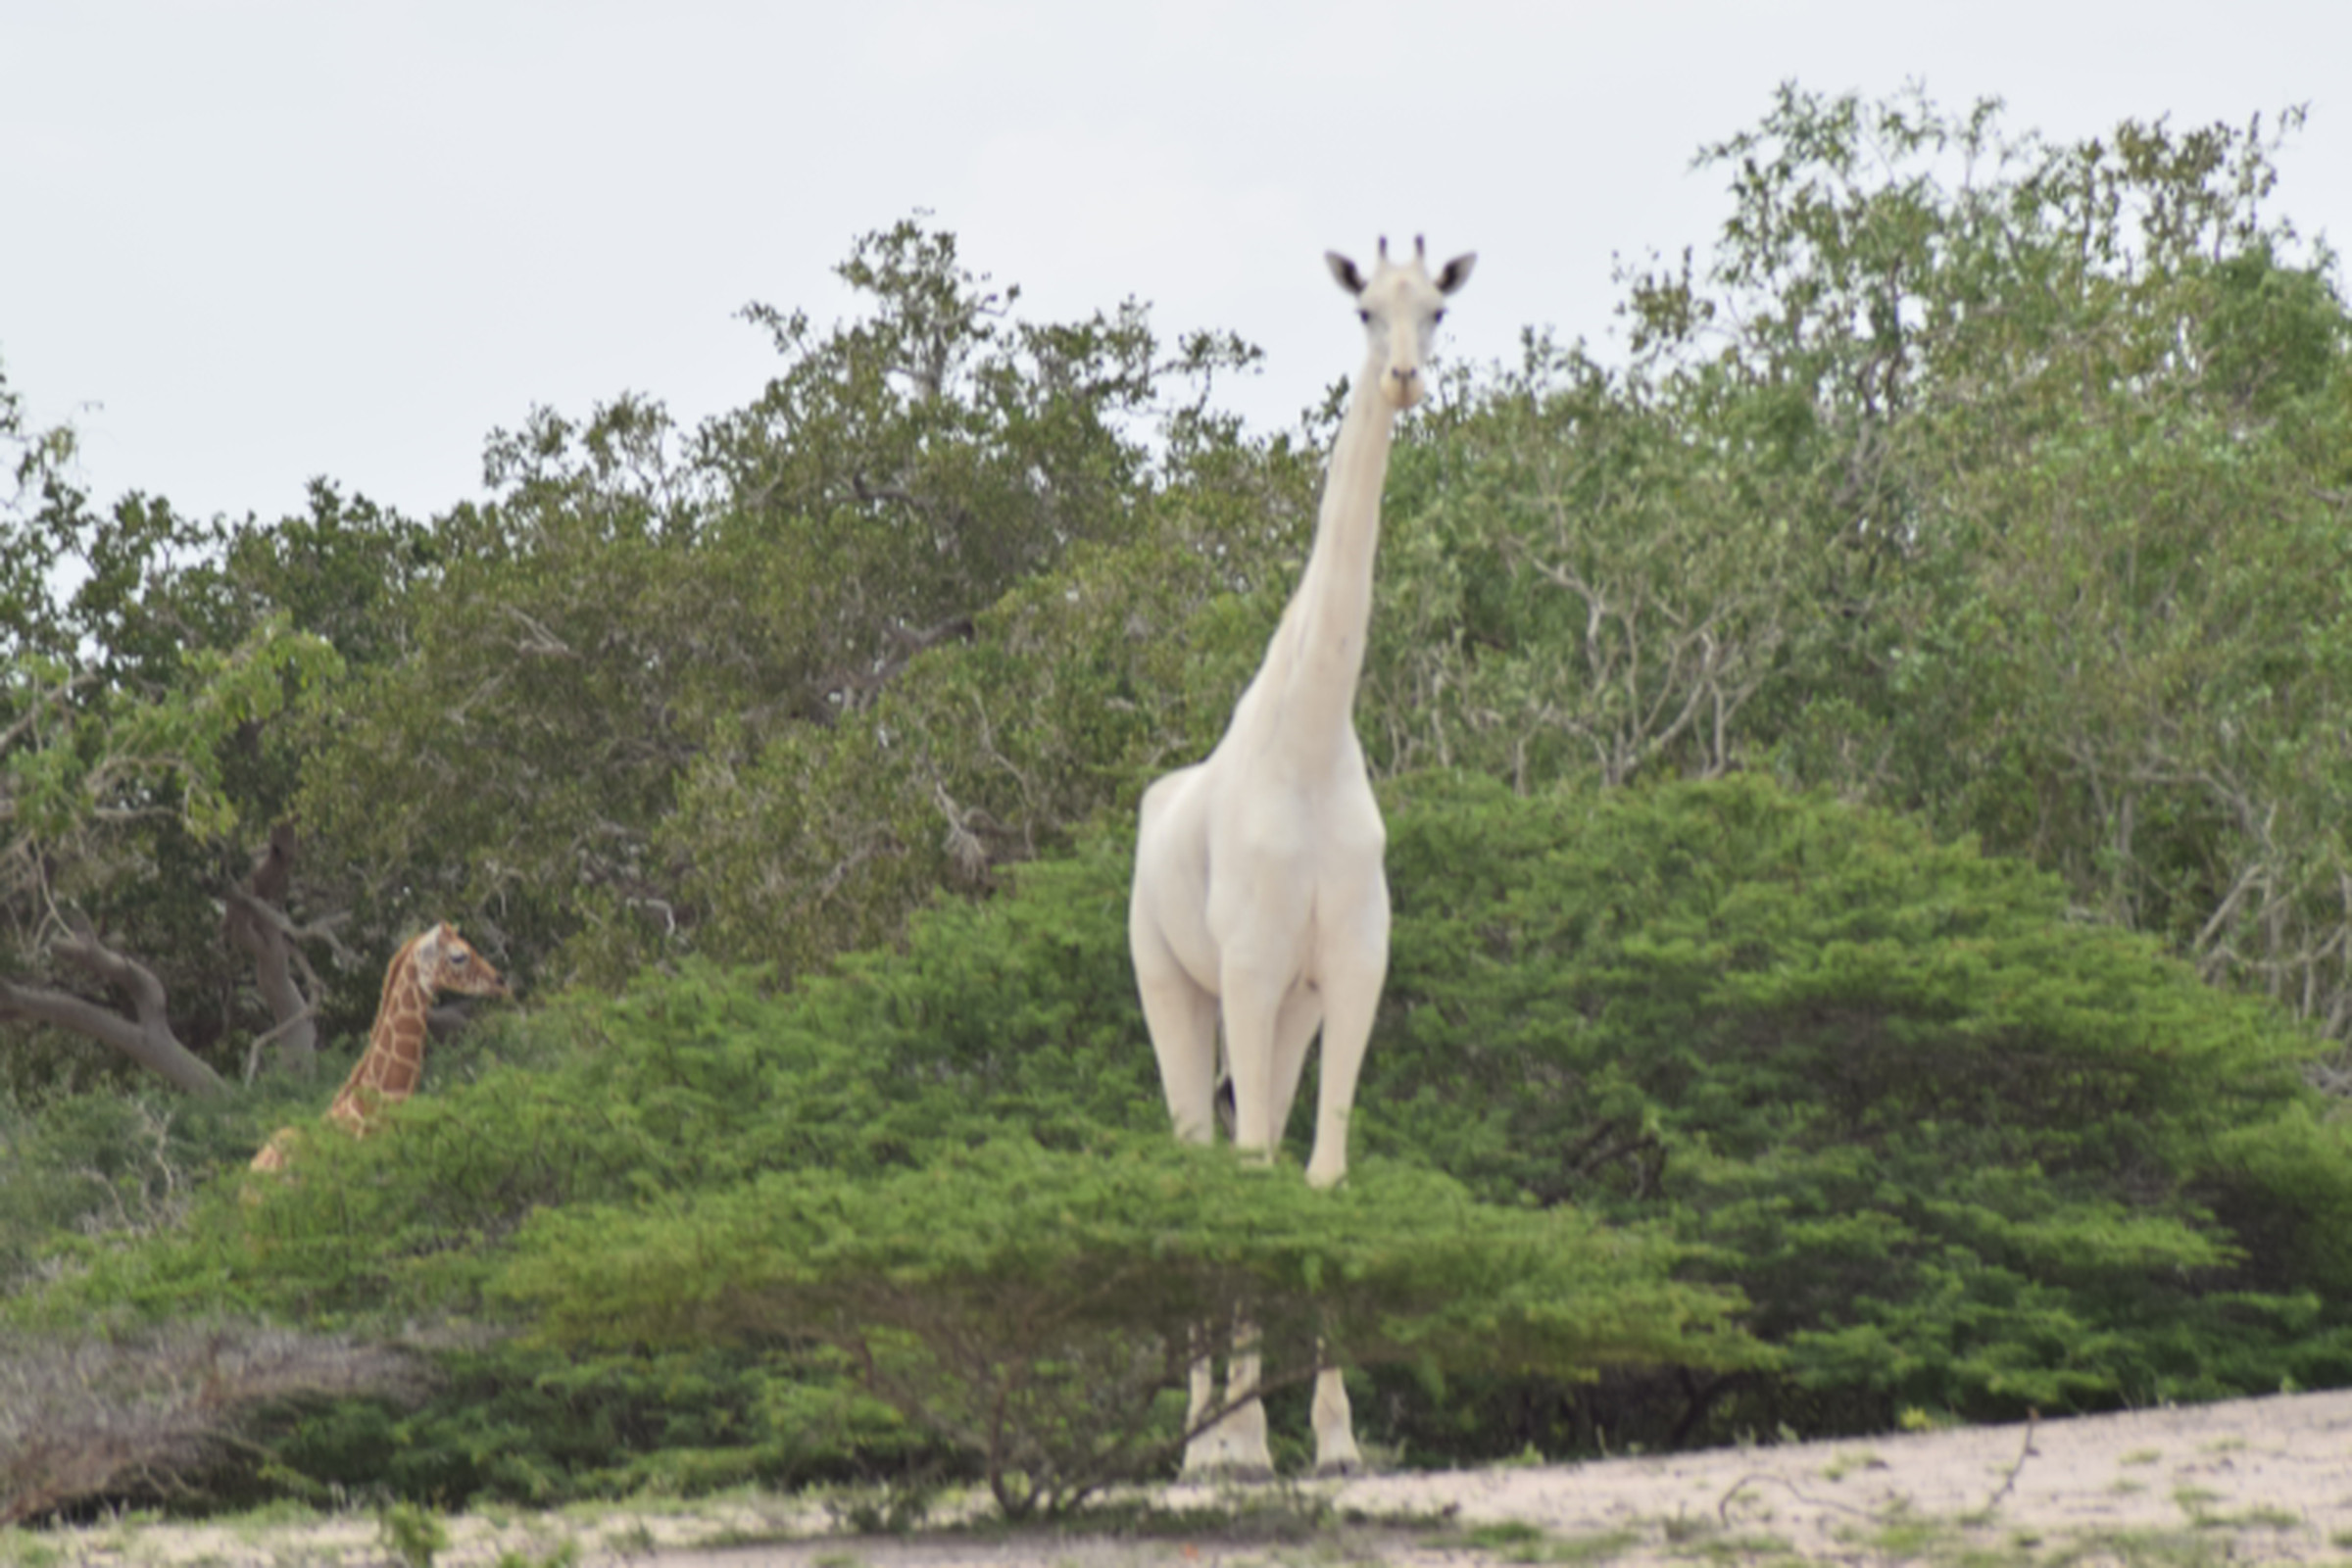 A white giraffe spotted in Kenya last month.